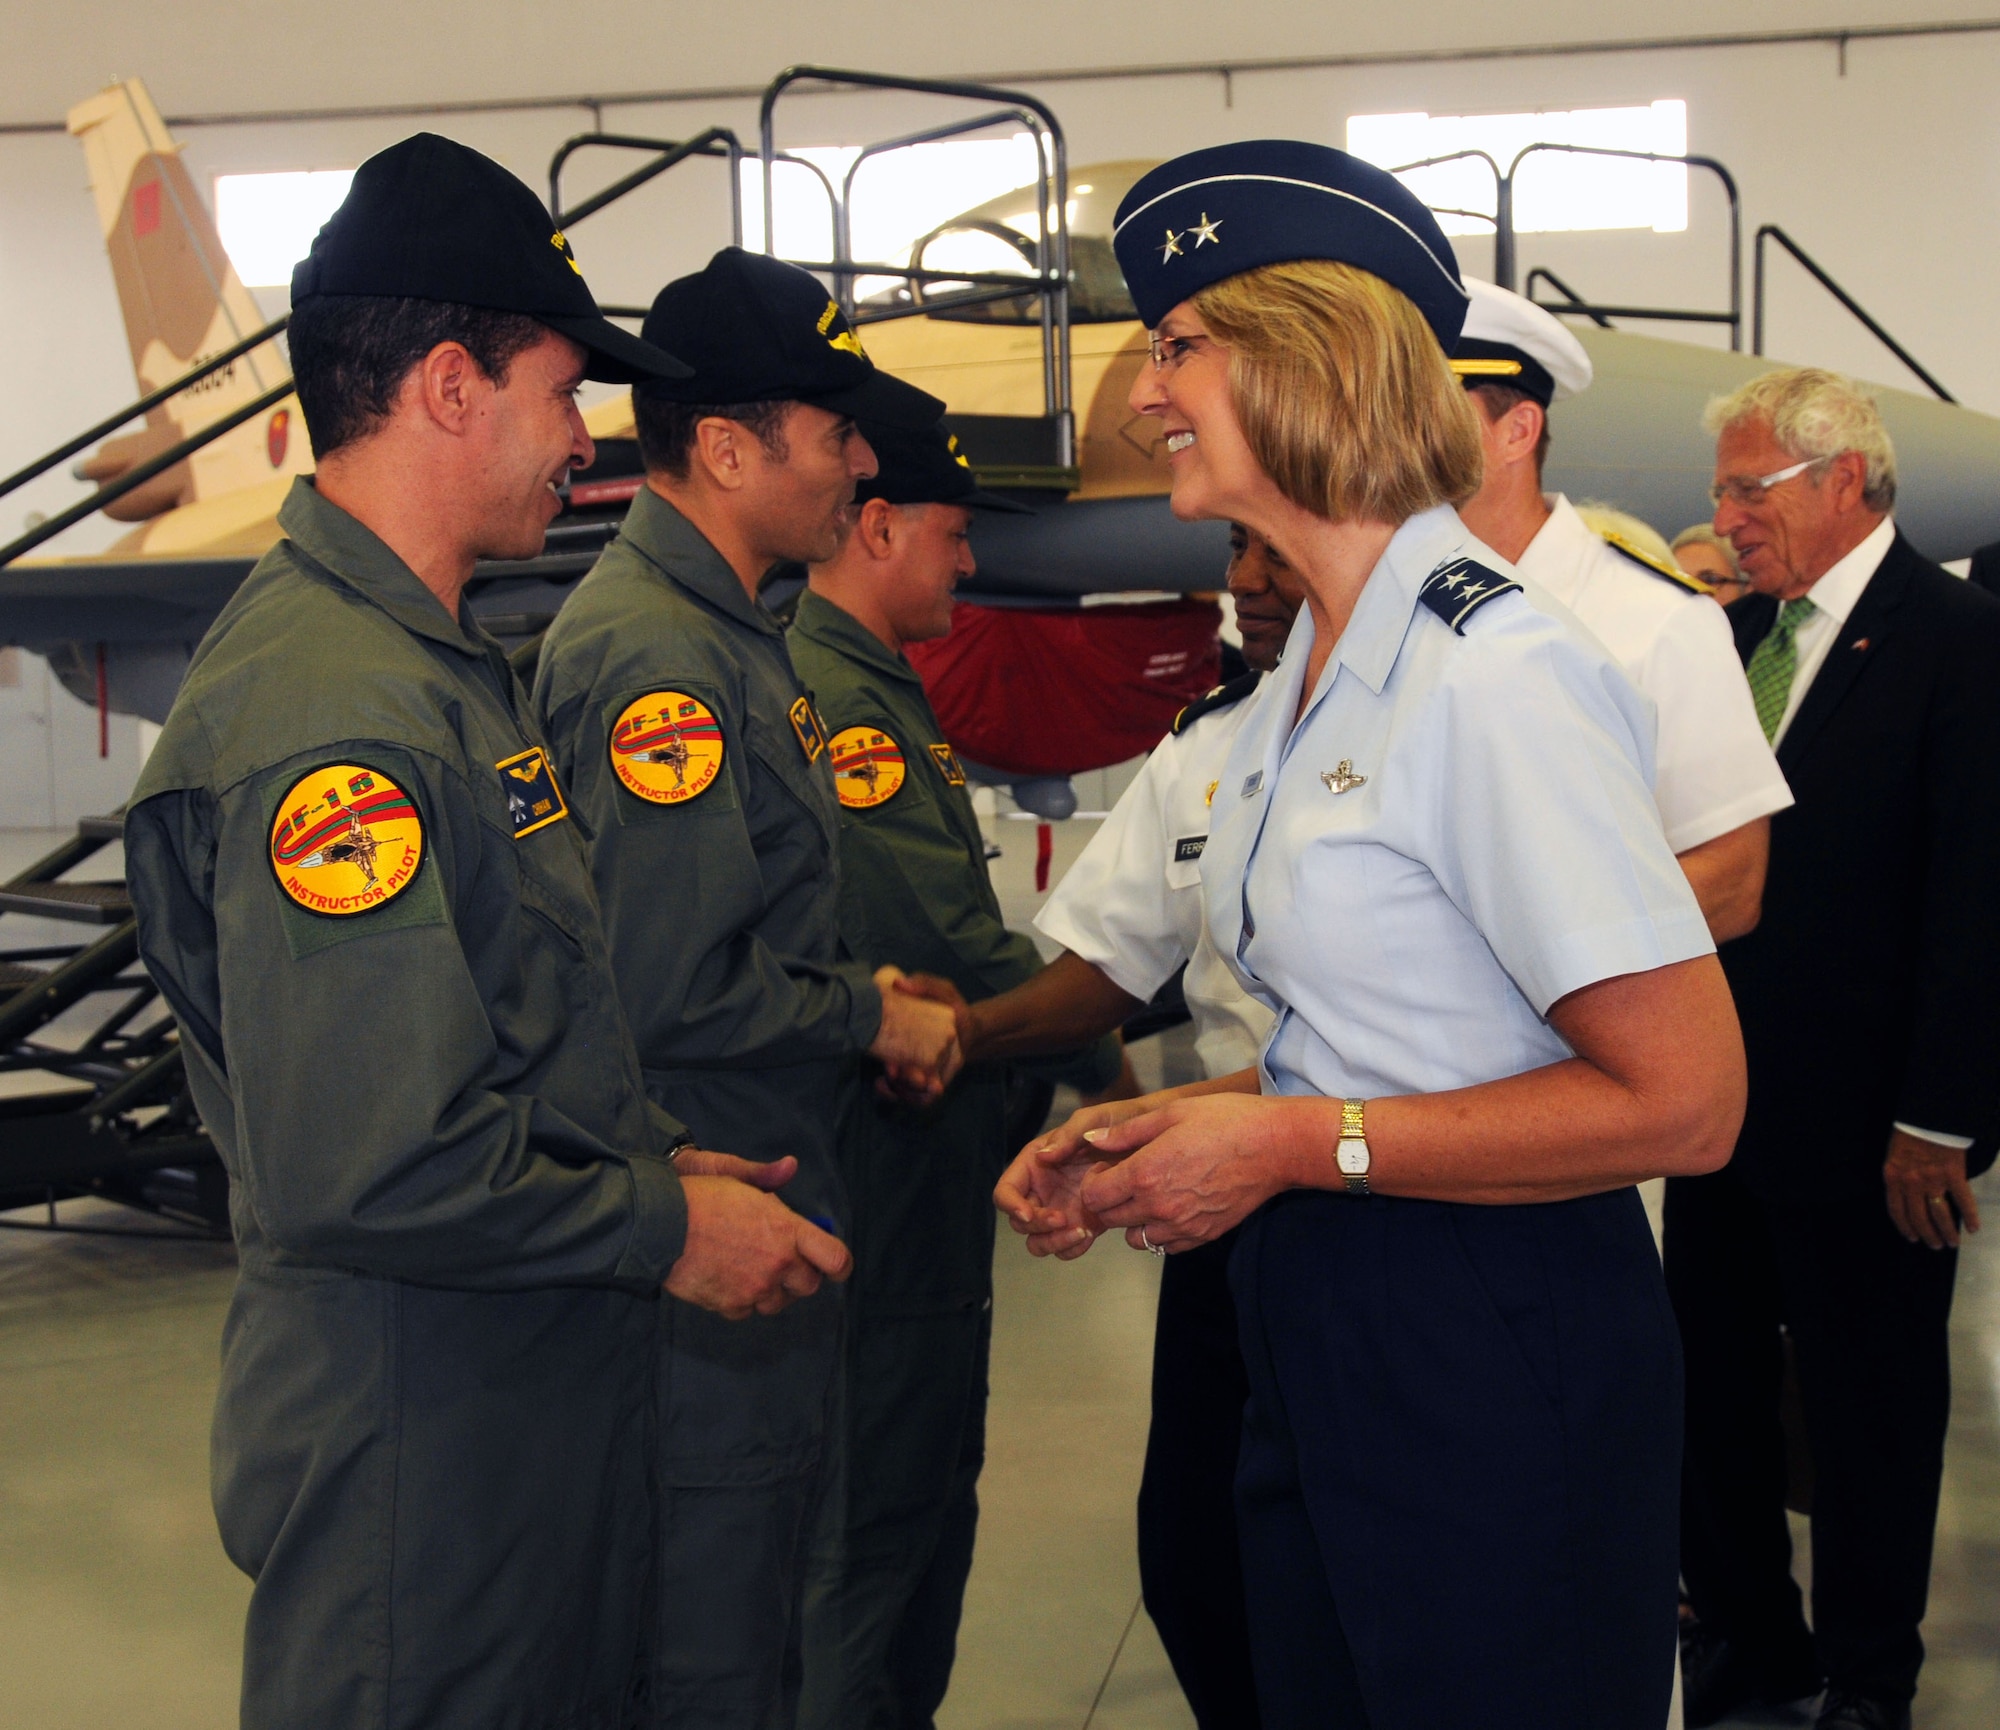 Maj. Gen. Margaret Woodward, Air Forces Africa (17th Air Force) commander, meets the first instructor pilots to graduate from U.S. led pilot training classes Aug. 4, 2011. The two-year program in Tucson, Arizona was designed to train and familiarize U.S. and international pilots with the F-16 Fighting Falcon. (Photo by U.S. Air Force Staff Sgt. Stefanie Torres)